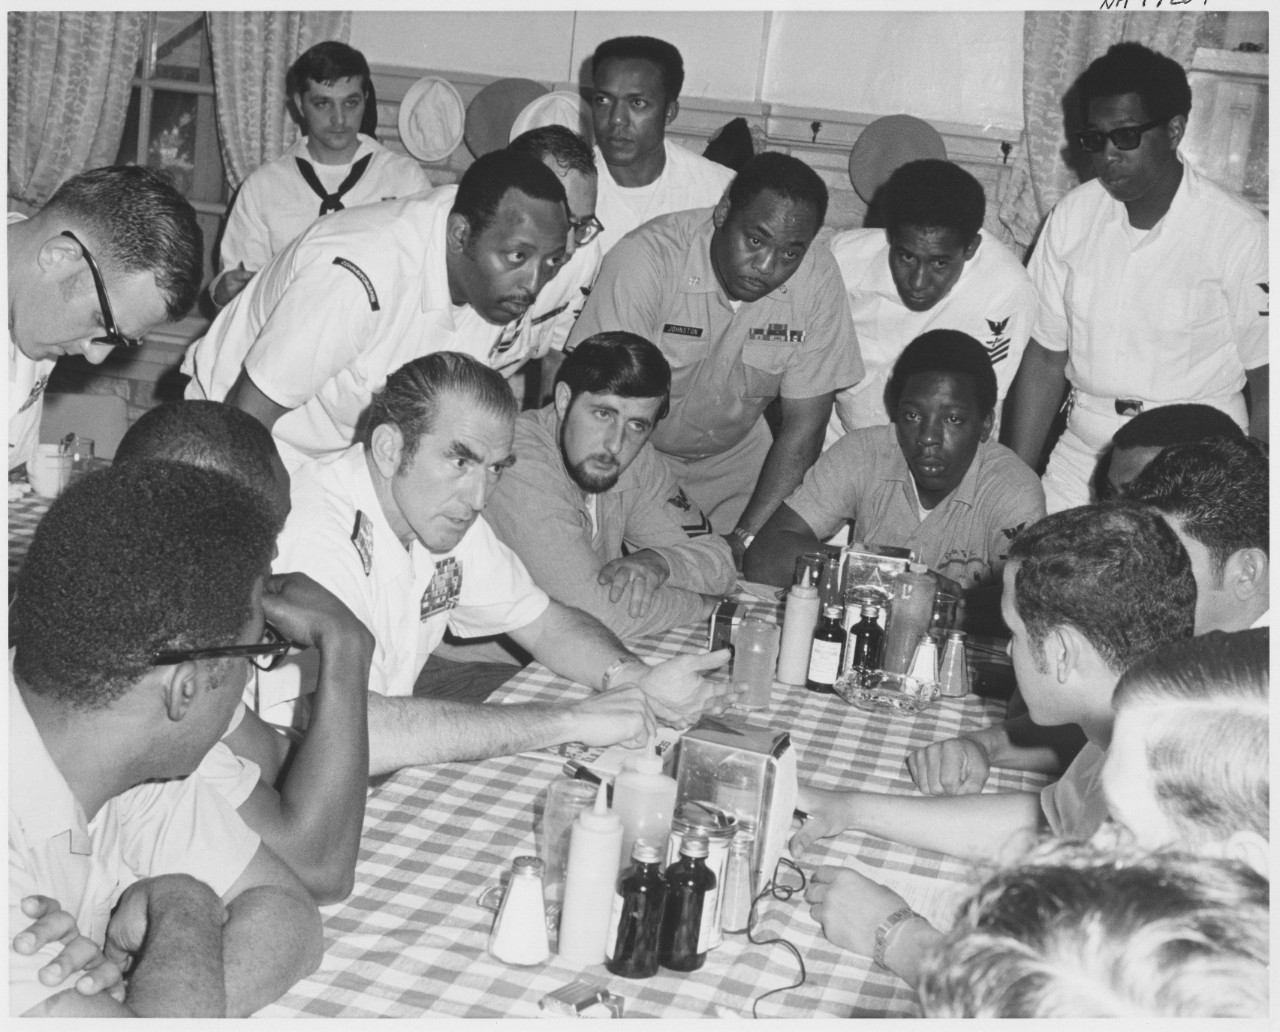 A White man in a white Navy uniform sits in the middle of a group of men, both White and Black, at a table. 